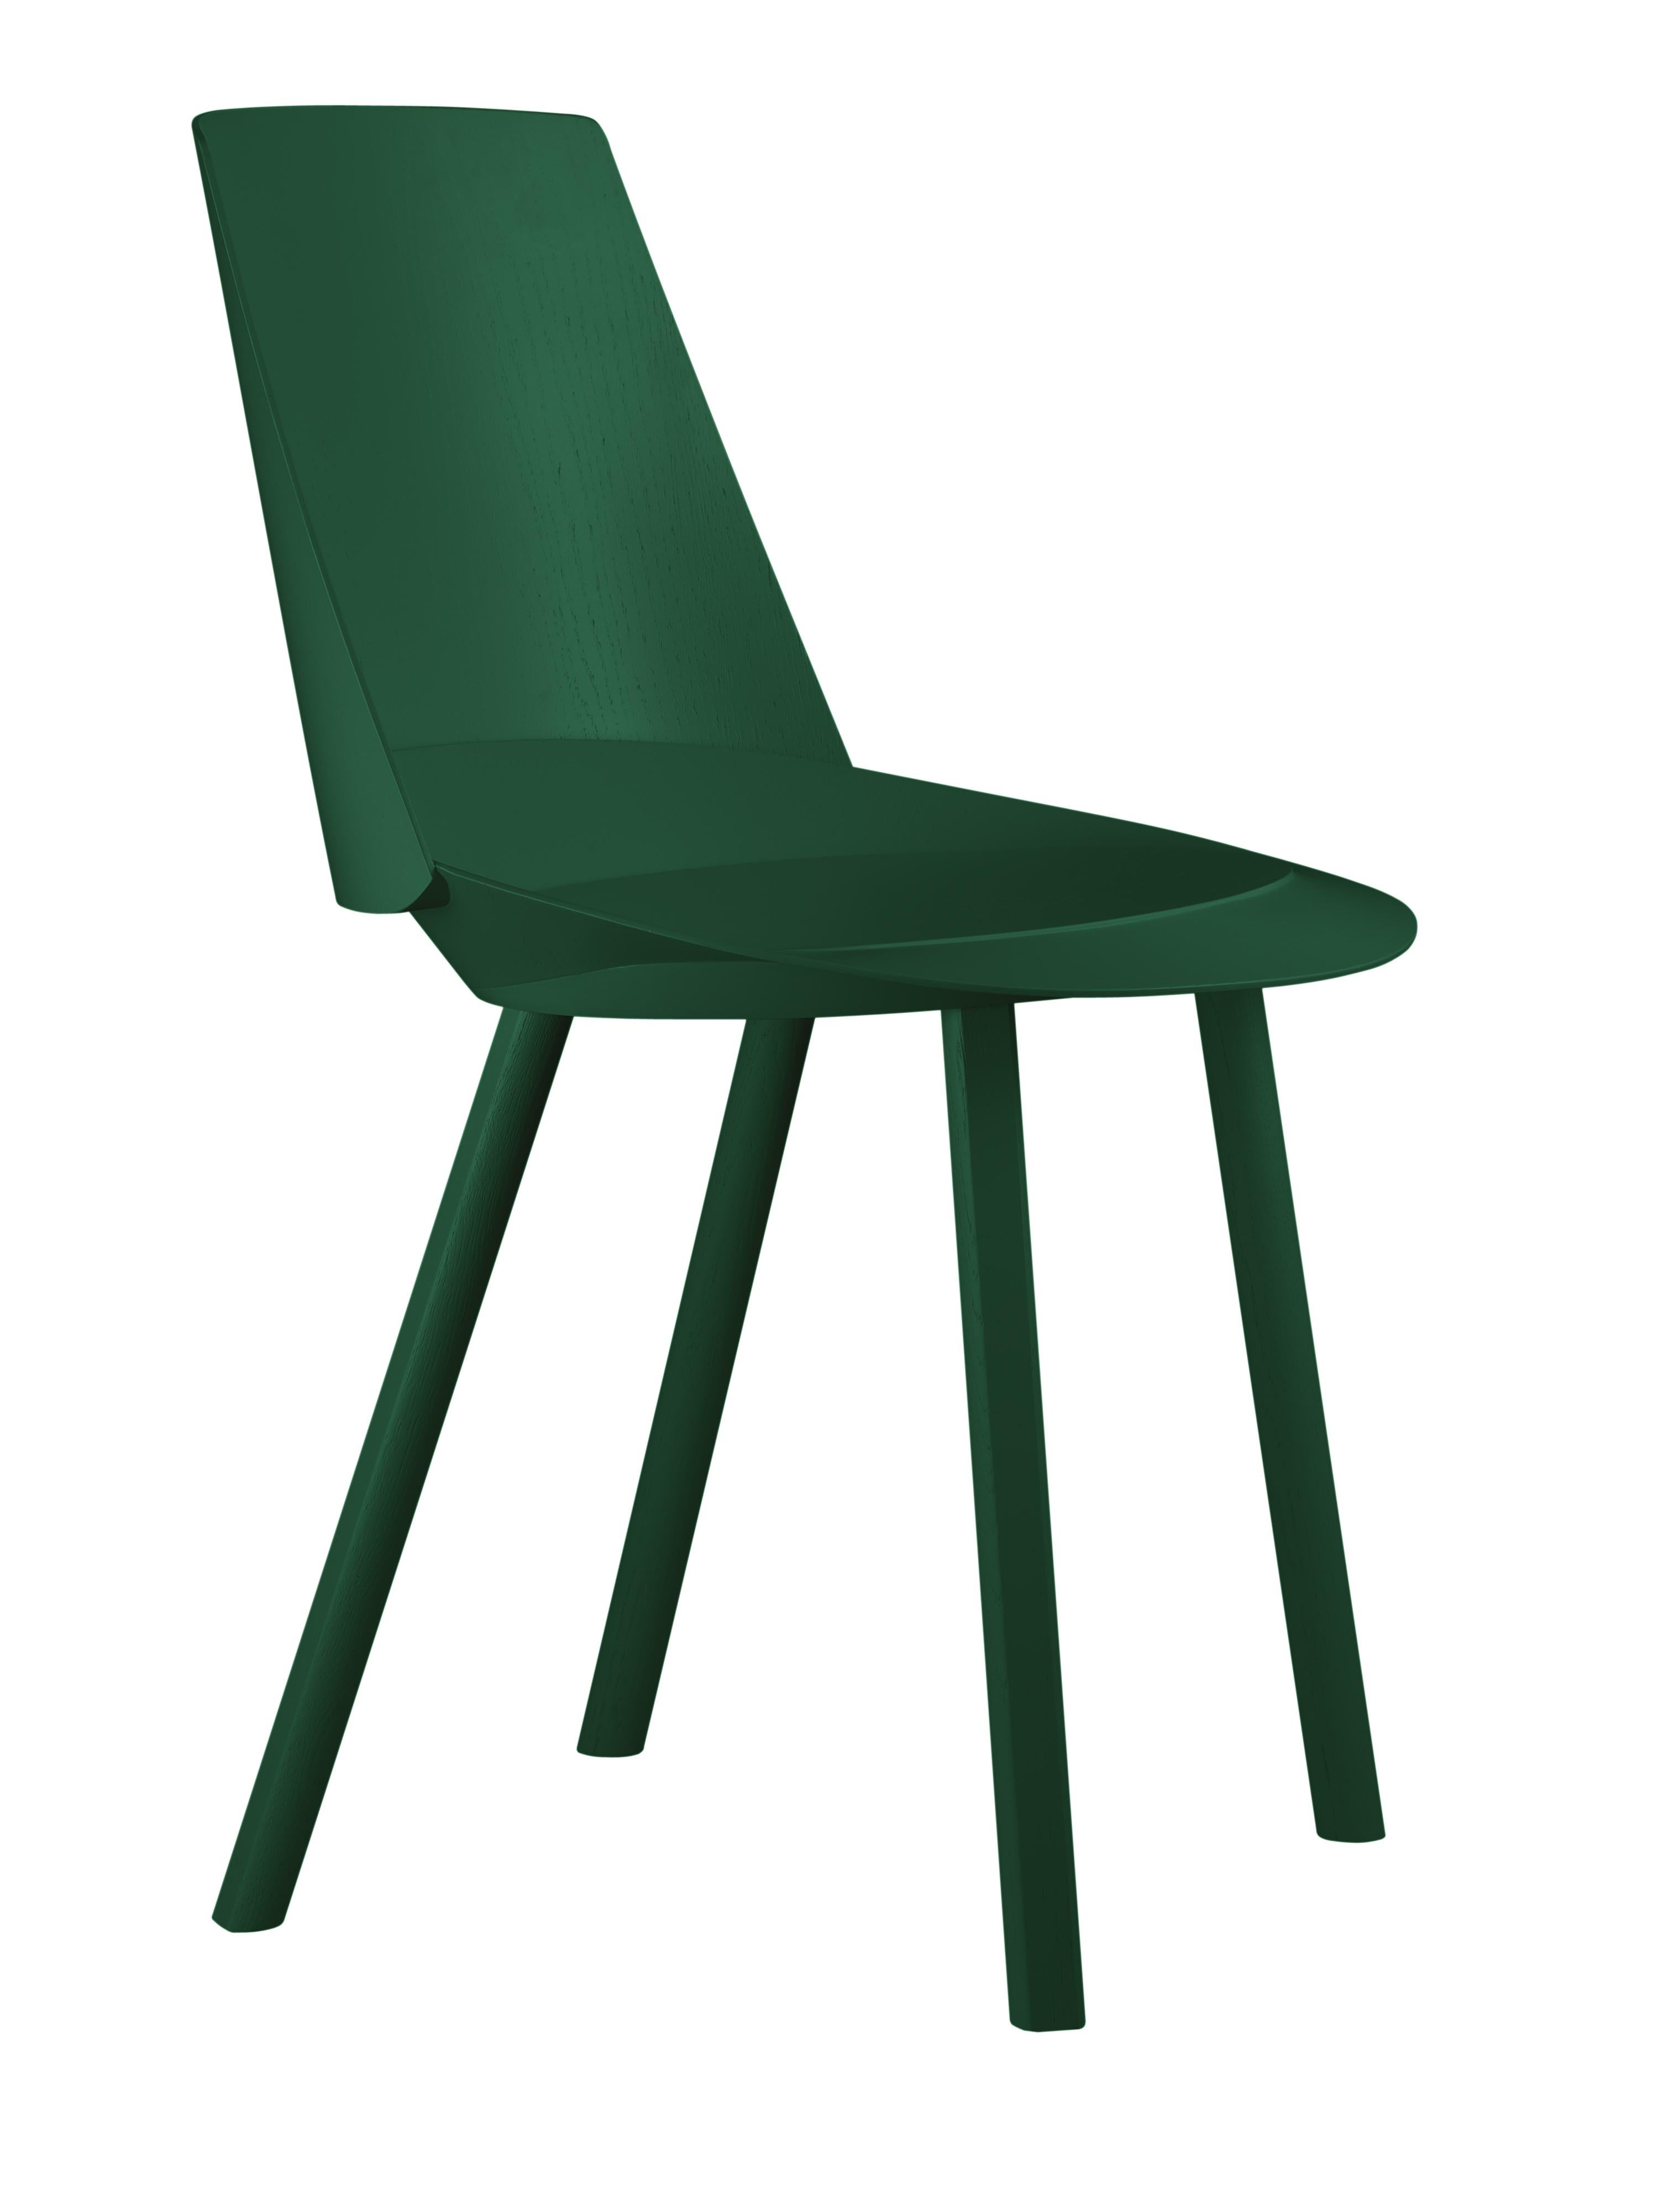 For Sale: Green (Ivy Green Lacquer) e15 Houdini Side Chair by Stefan Diez